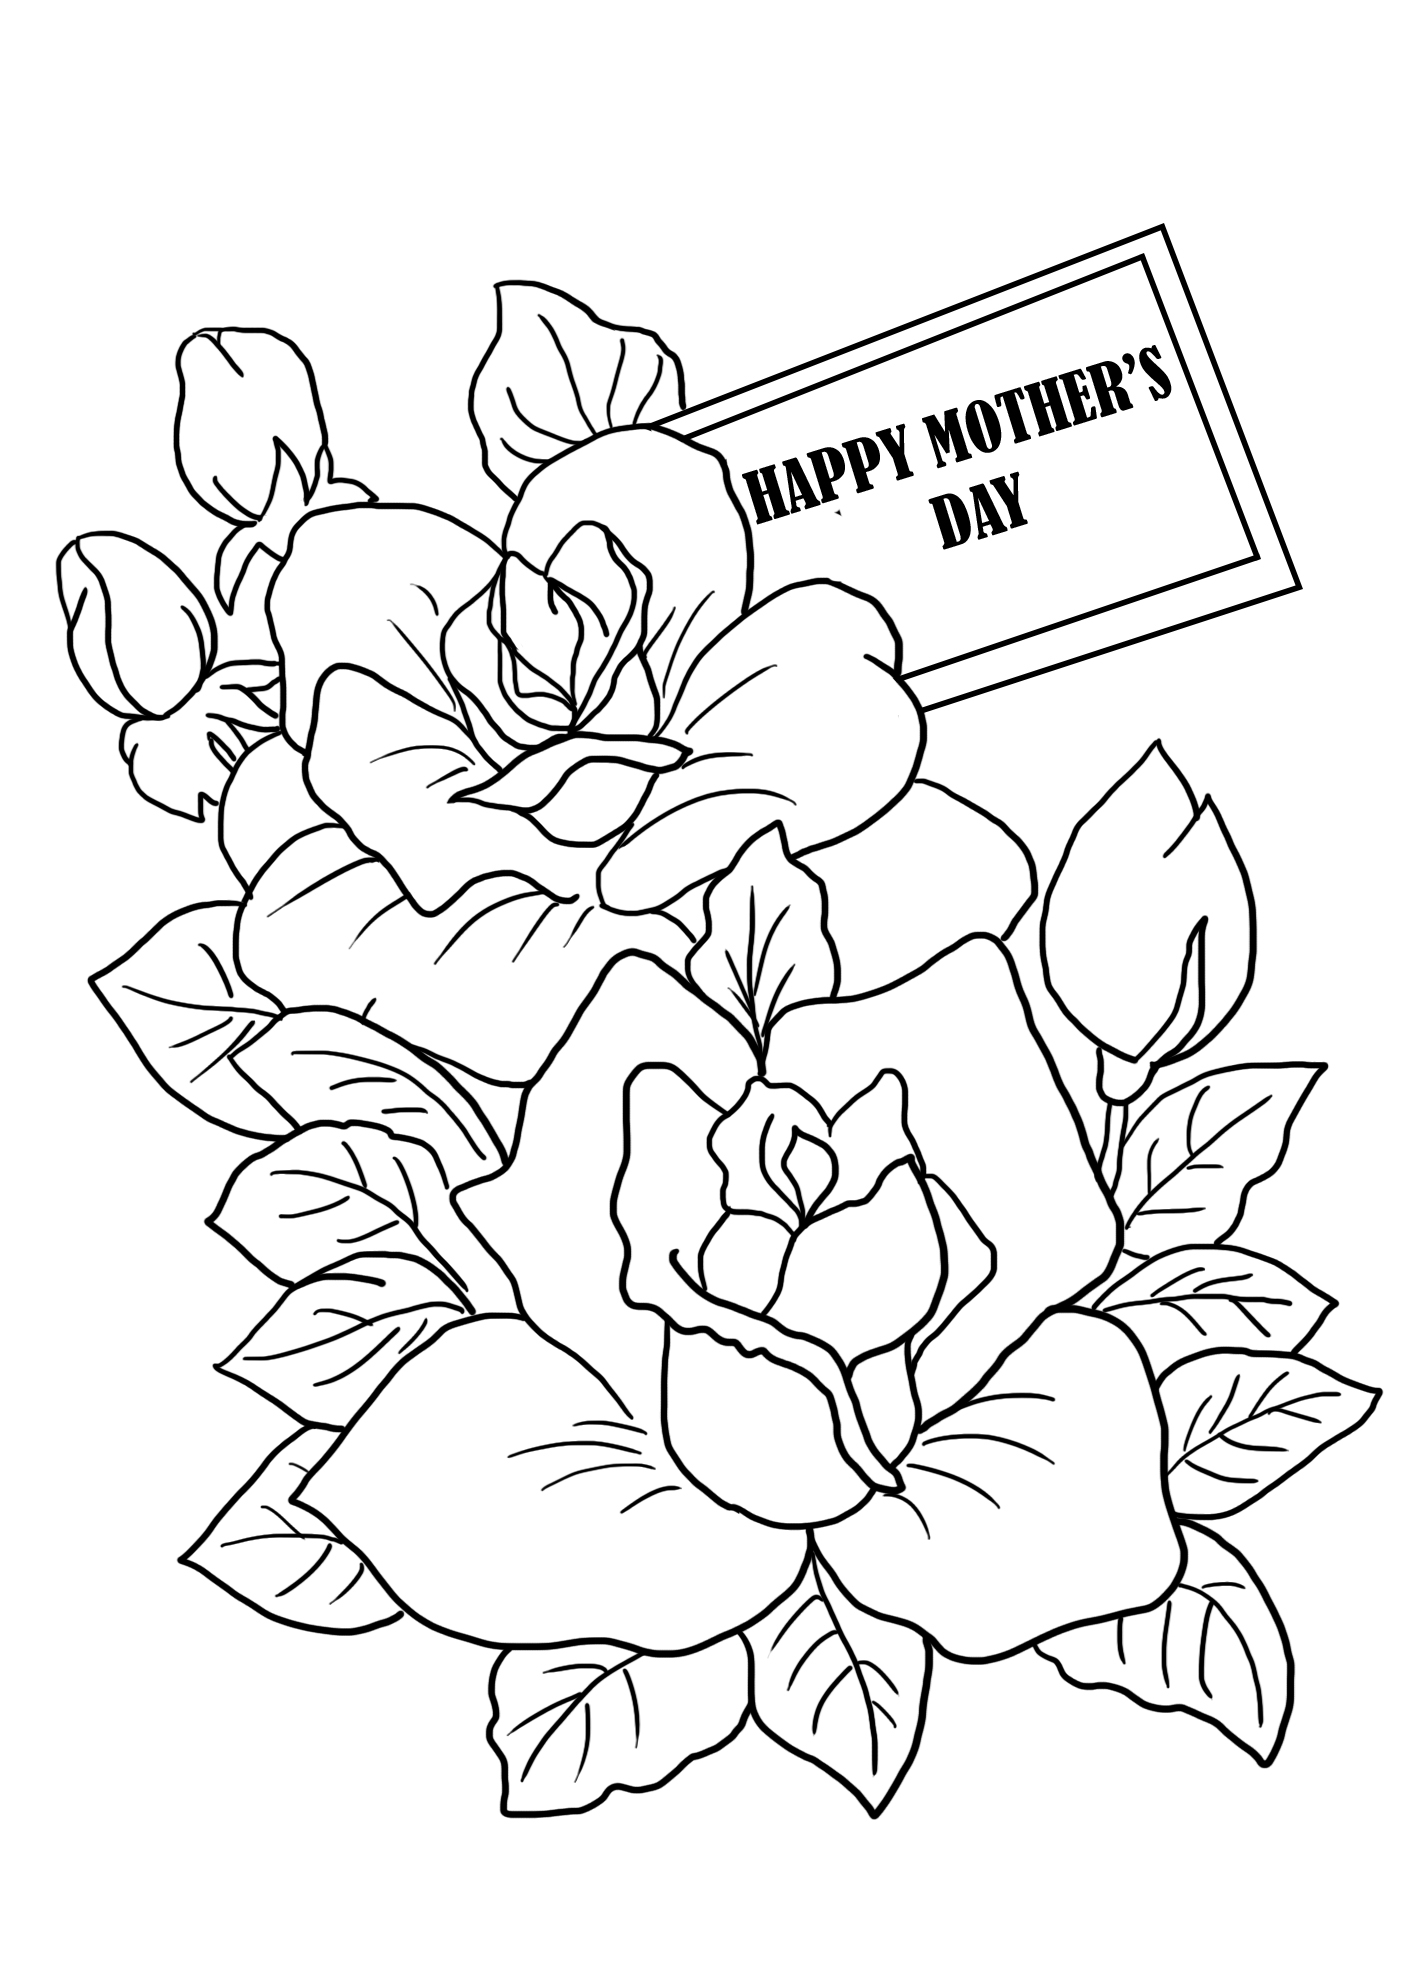 Download Mother's Day Coloring Pages